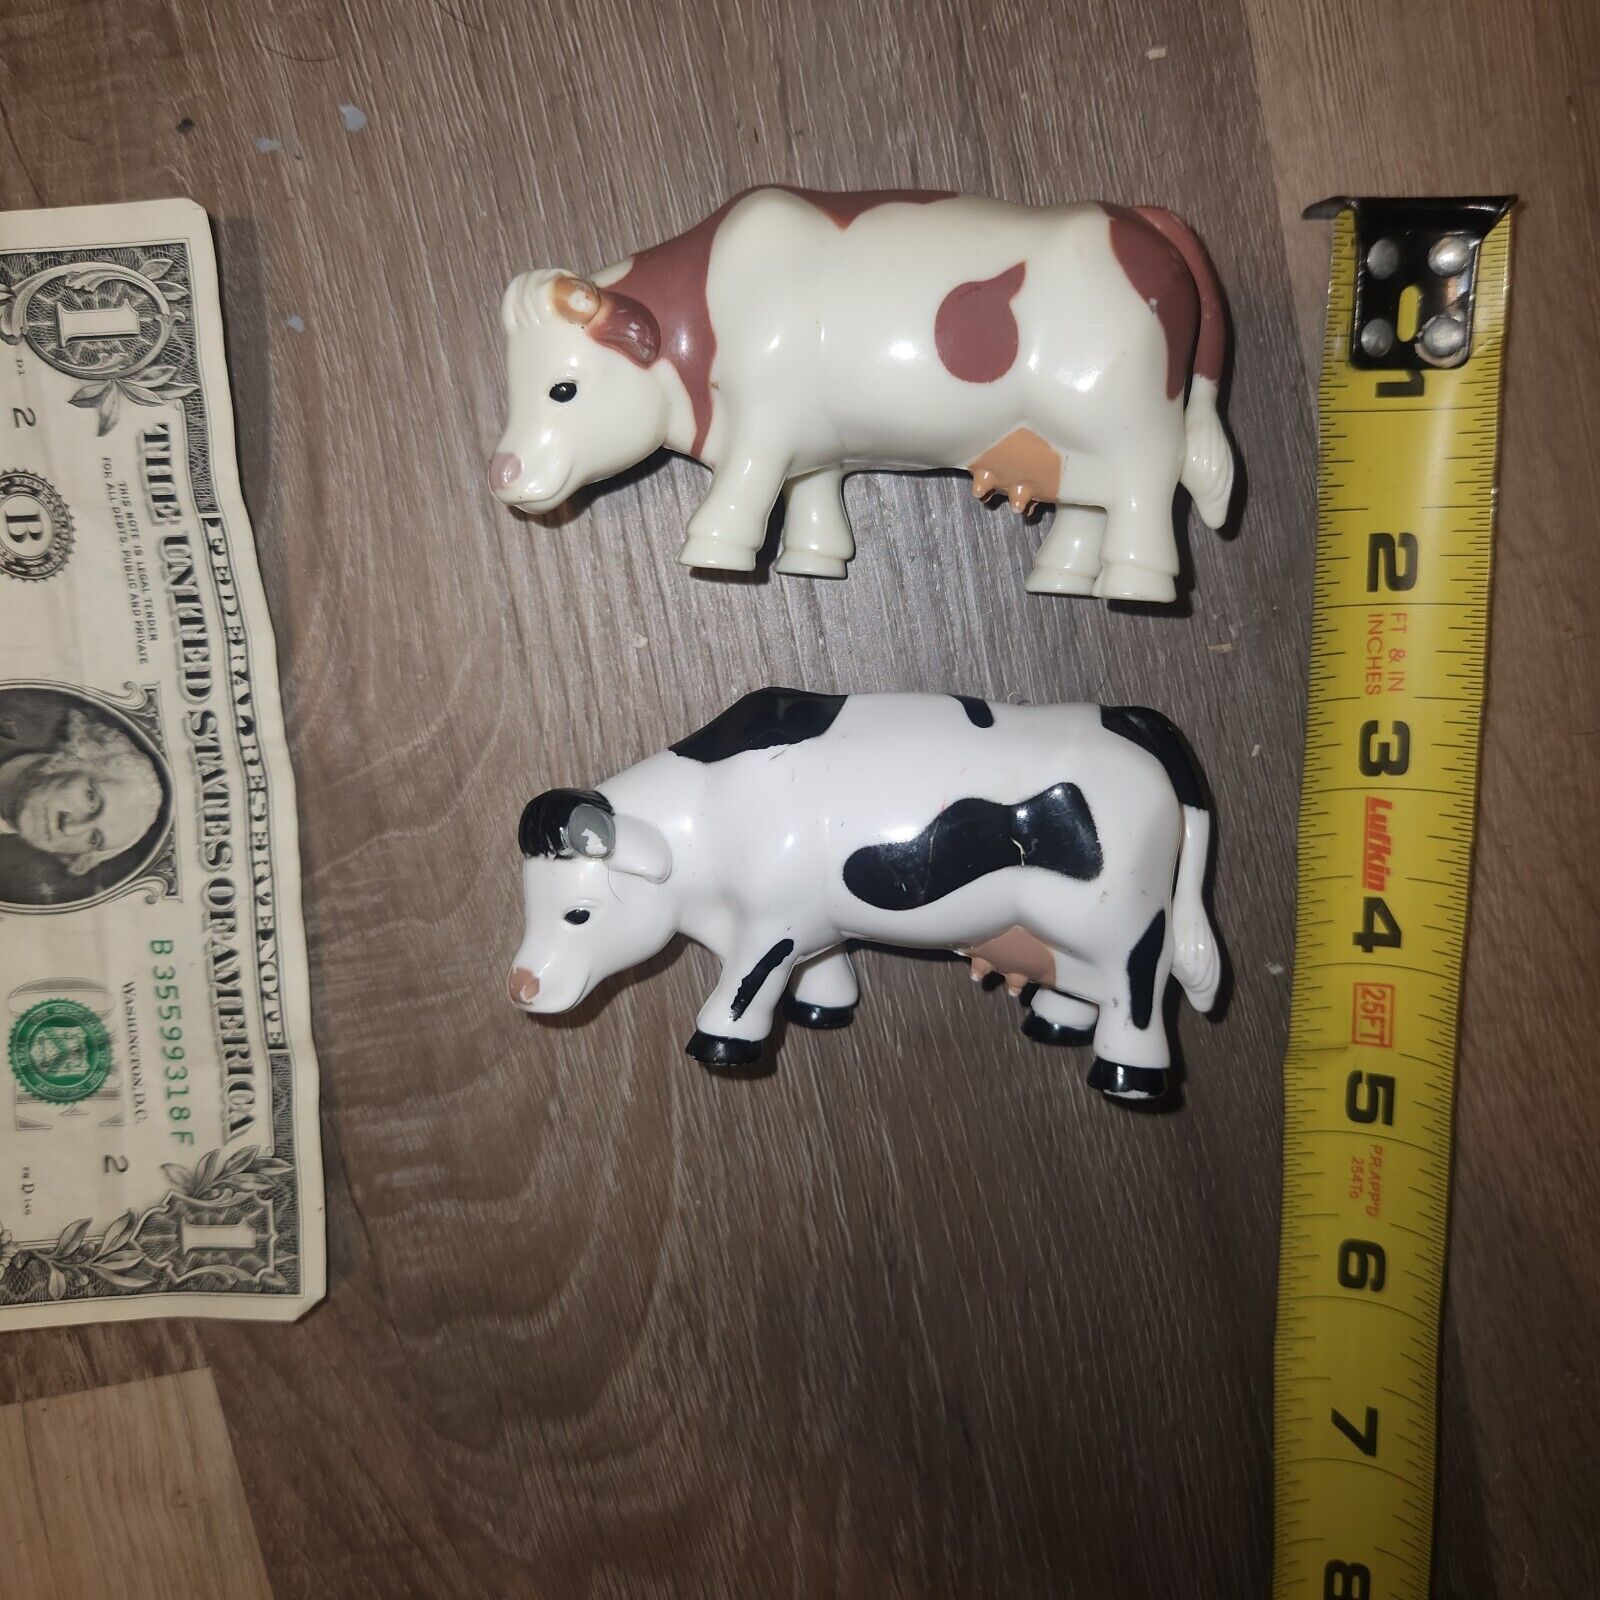 Lot Of (2) Cow Figure Plastic Toy For Diarama Play Barn Farm Animal Play Cattle